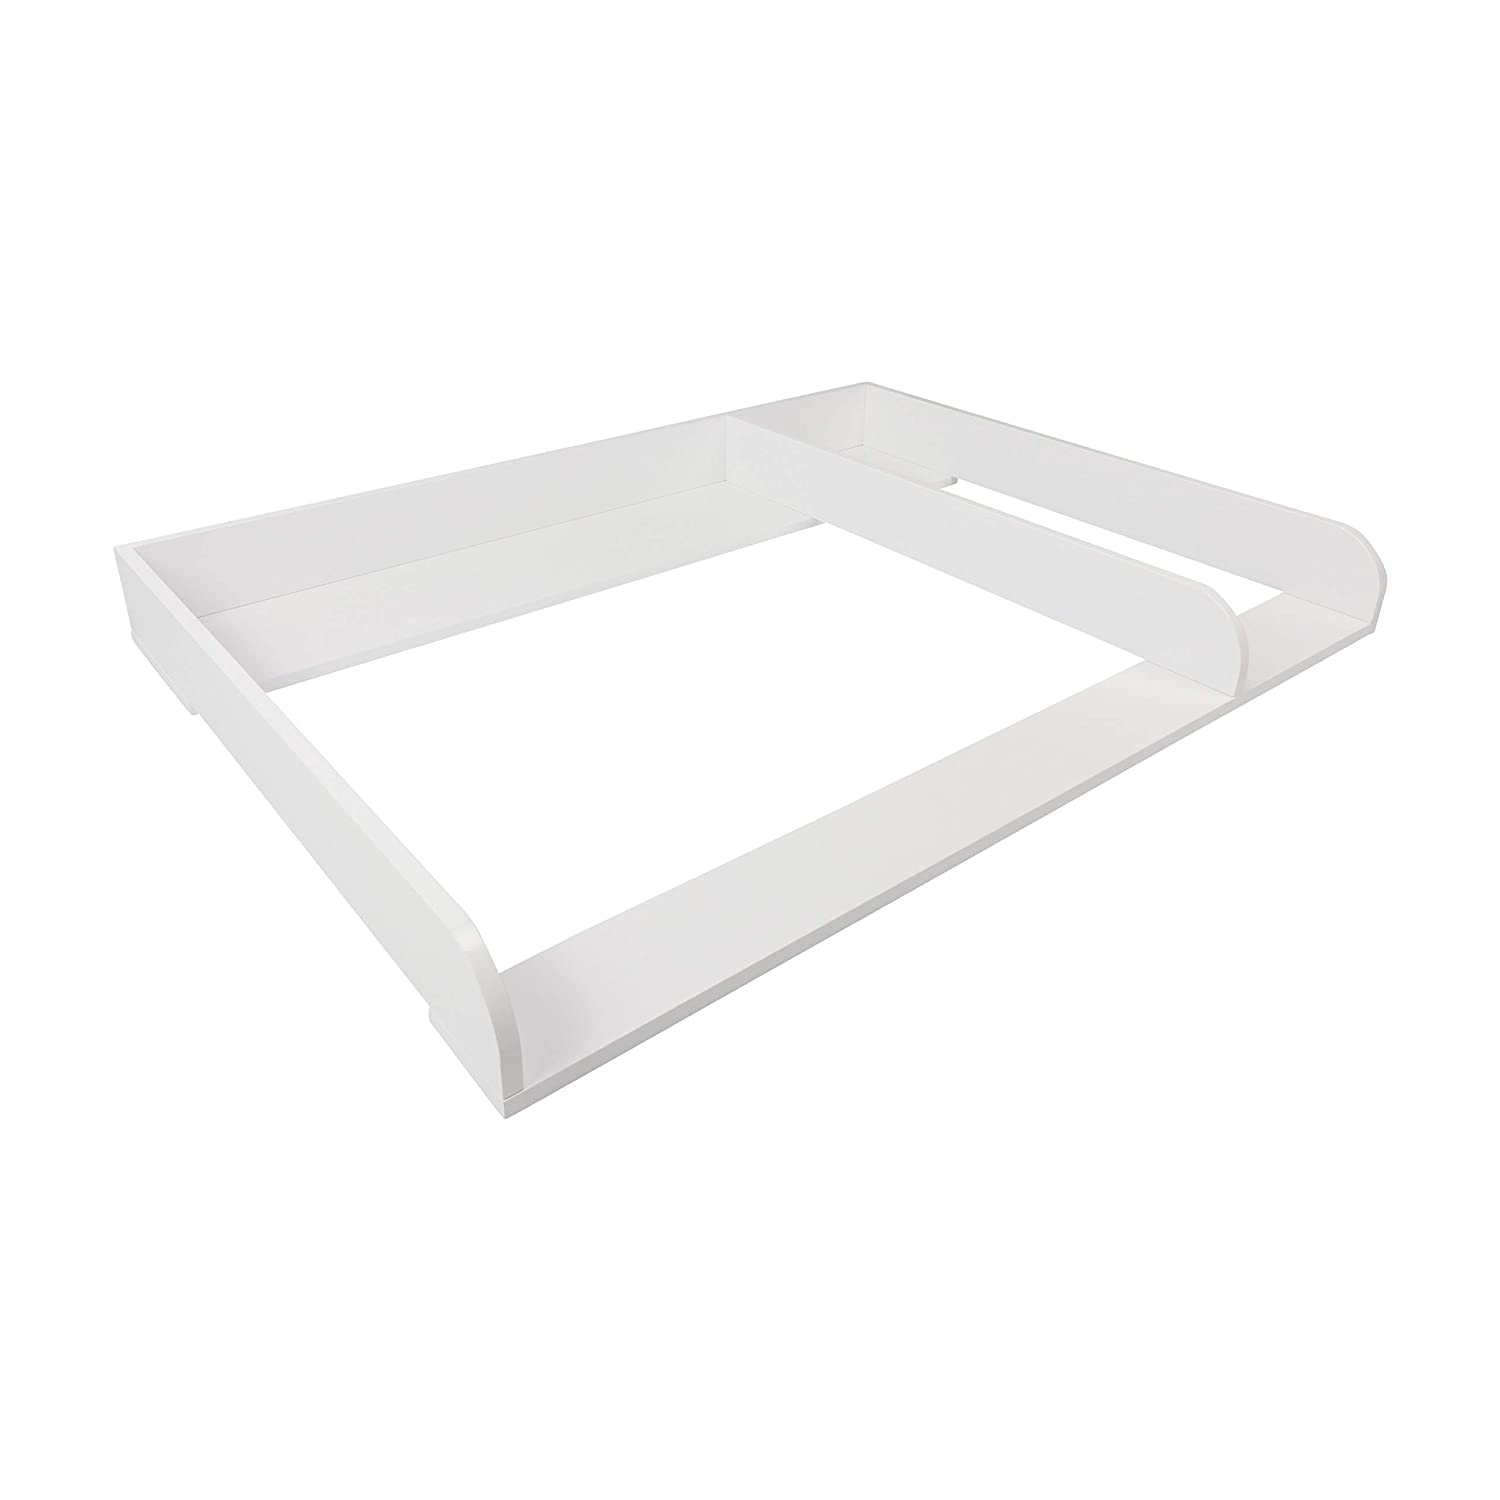 PuckDaddy XXL Kimi Changing Mat, 108 x 80 x 10 cm, Wooden Changing Mat in White, High-Quality Changing Table Top with Divider, Suitable for IKEA Hemnes Dressers, Includes Wall Mount